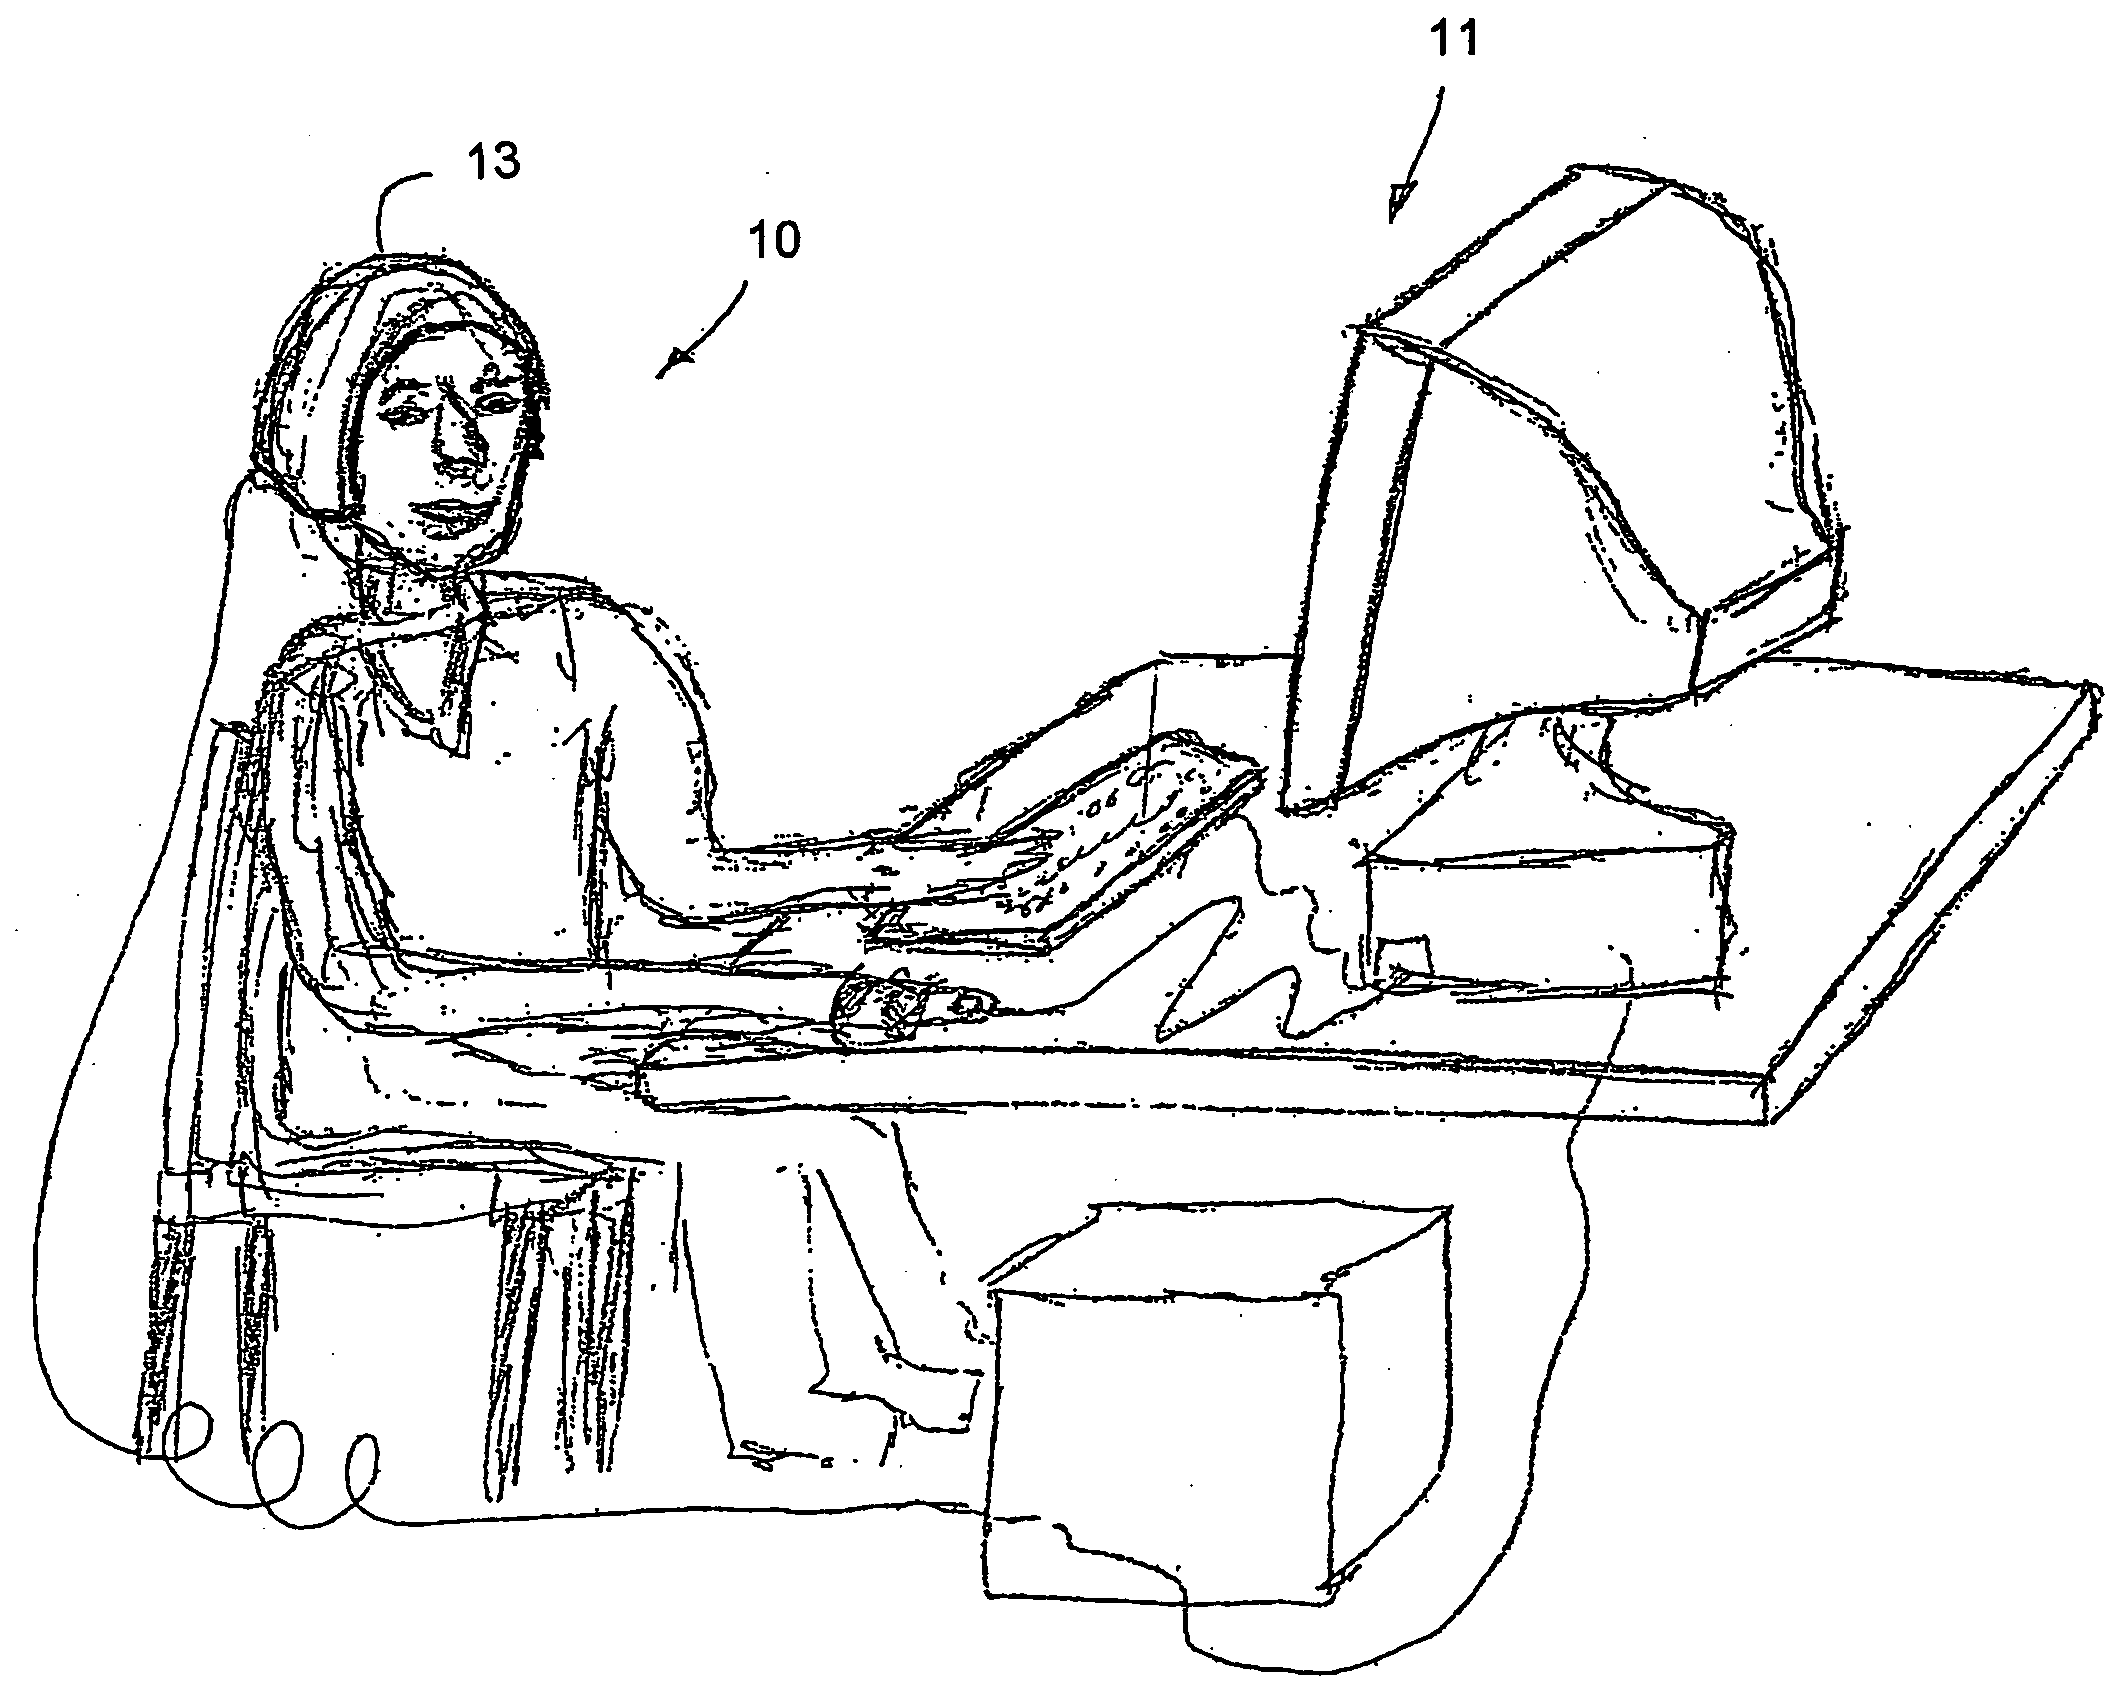 Collective brain measurement system and method